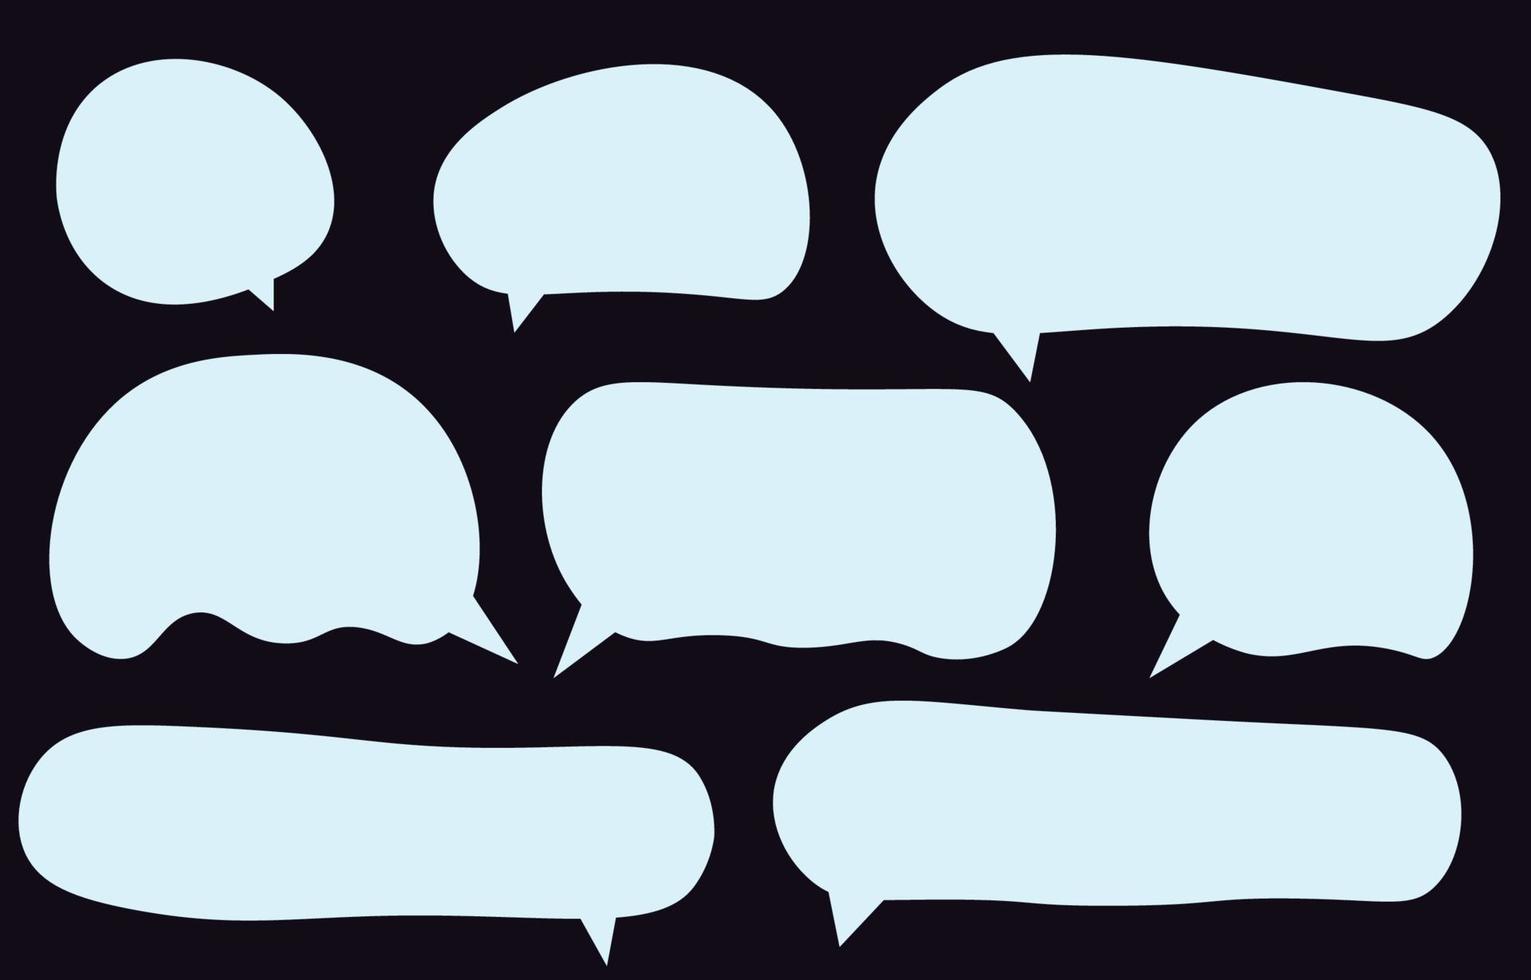 Speech bubbles, white snow concept and isolated on black background, used in winter and Christmas designs. vector